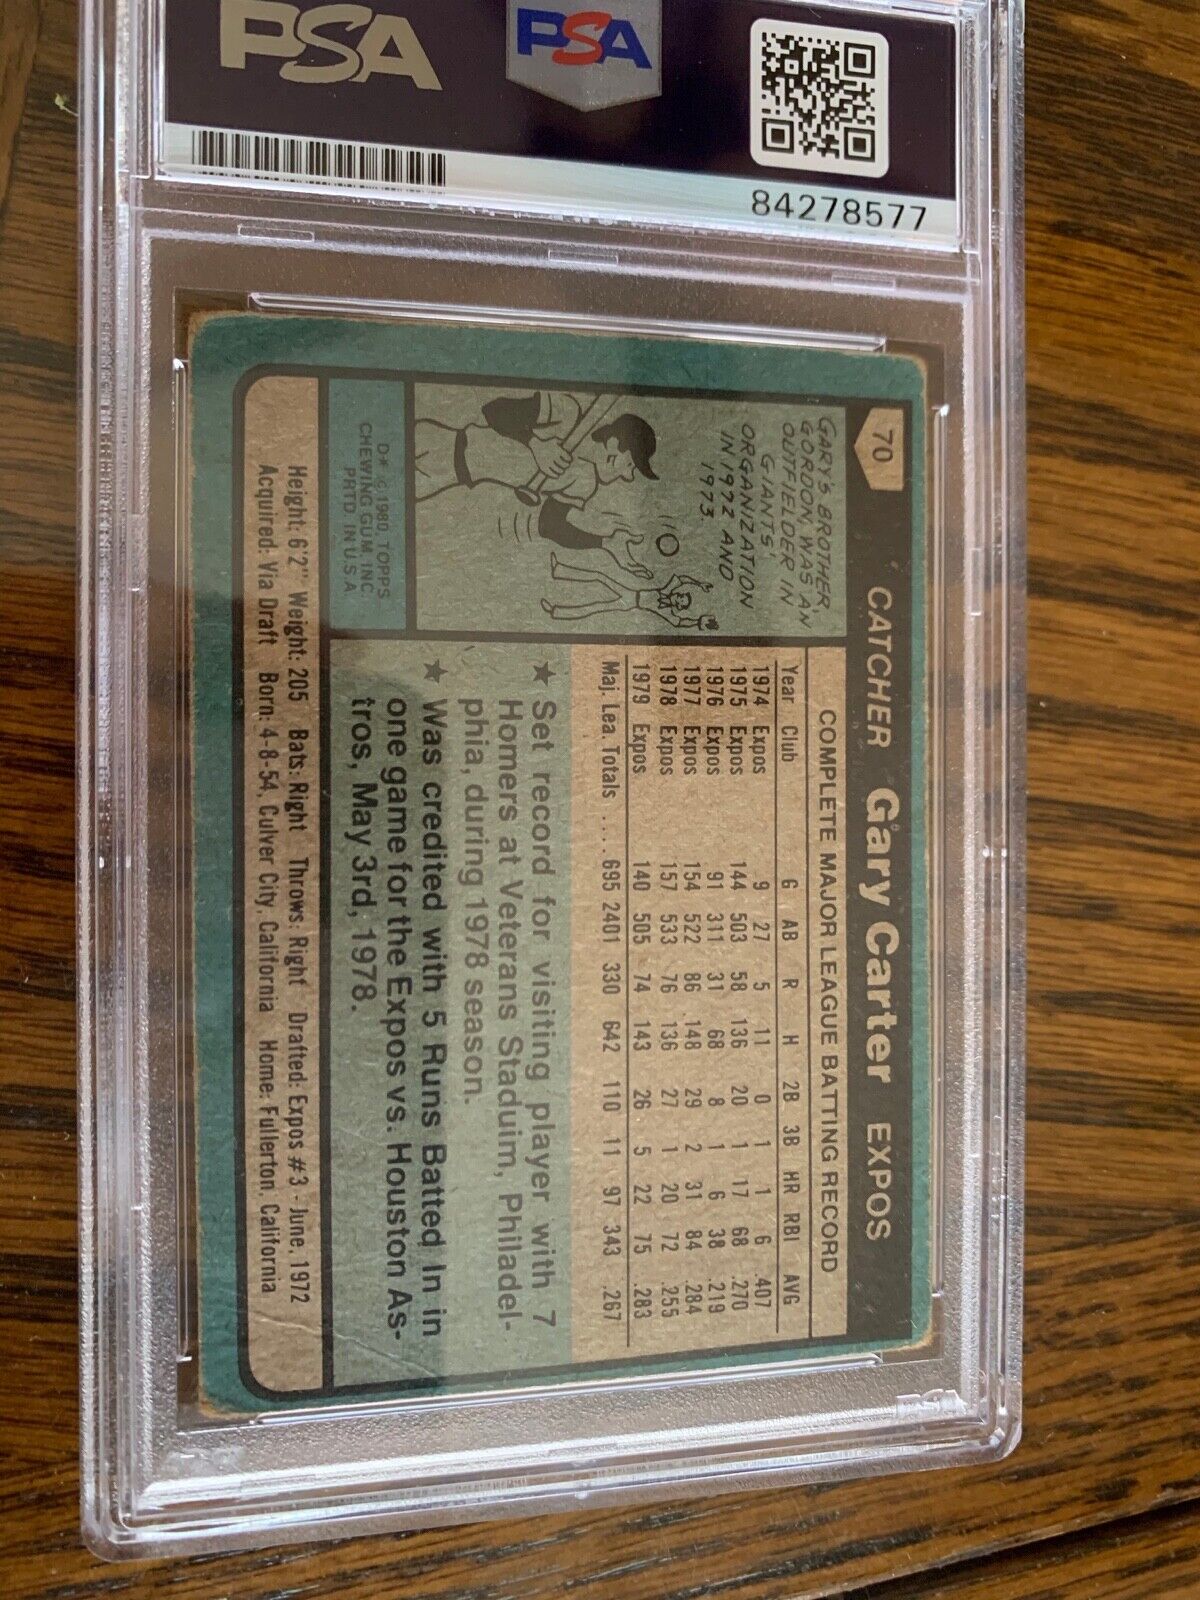 Gary Carter Autographed Signed 1980 Topps Card 70 PSA Slabbed Certified MLB